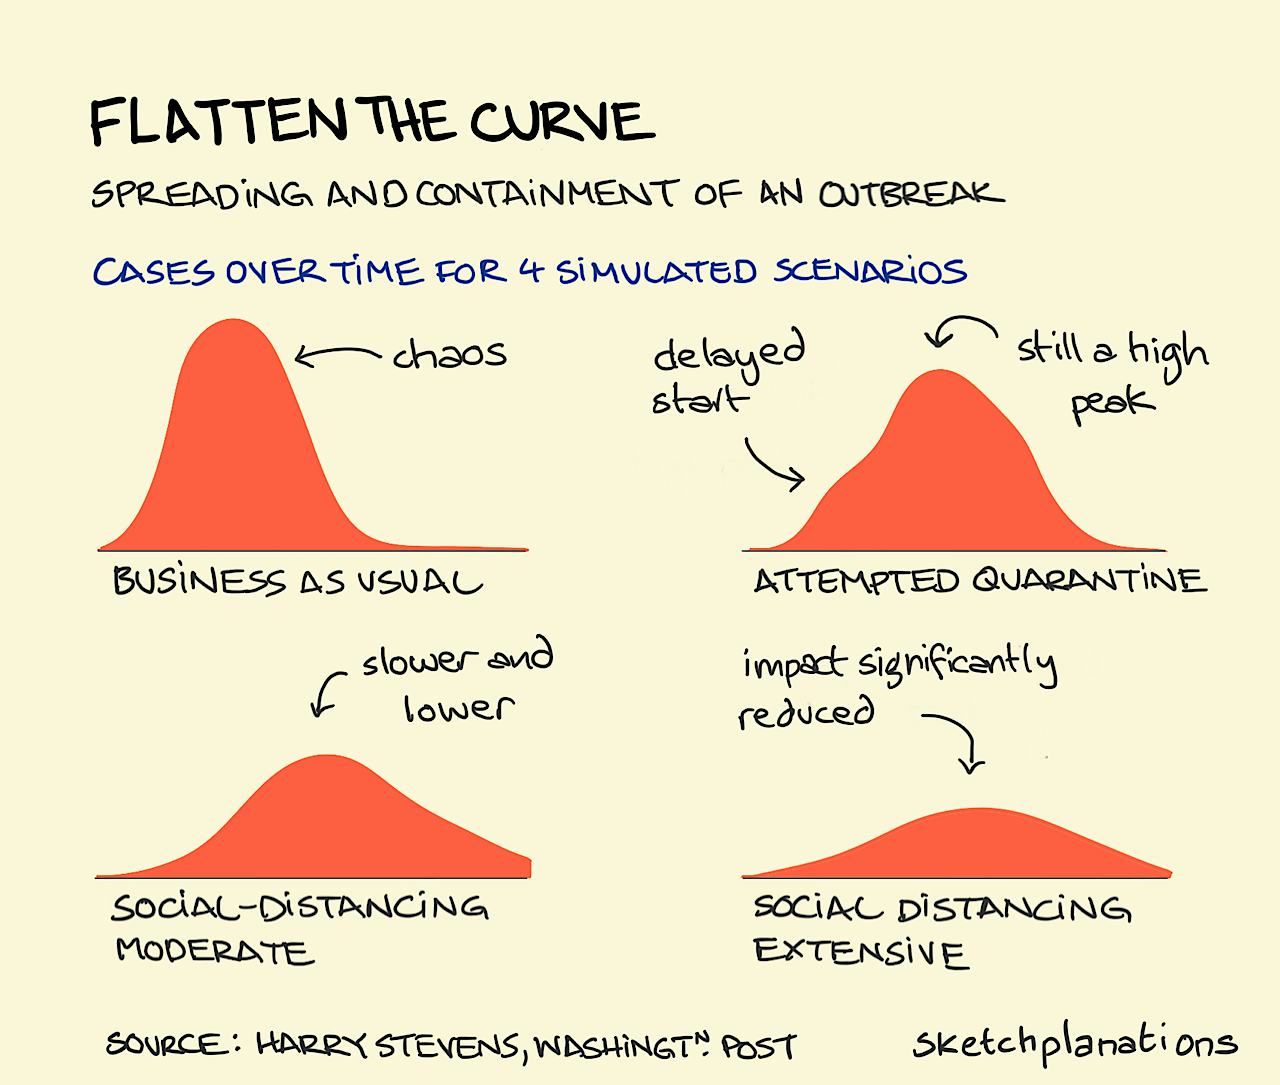 Flatten the curve of an outbreak - Sketchplanations